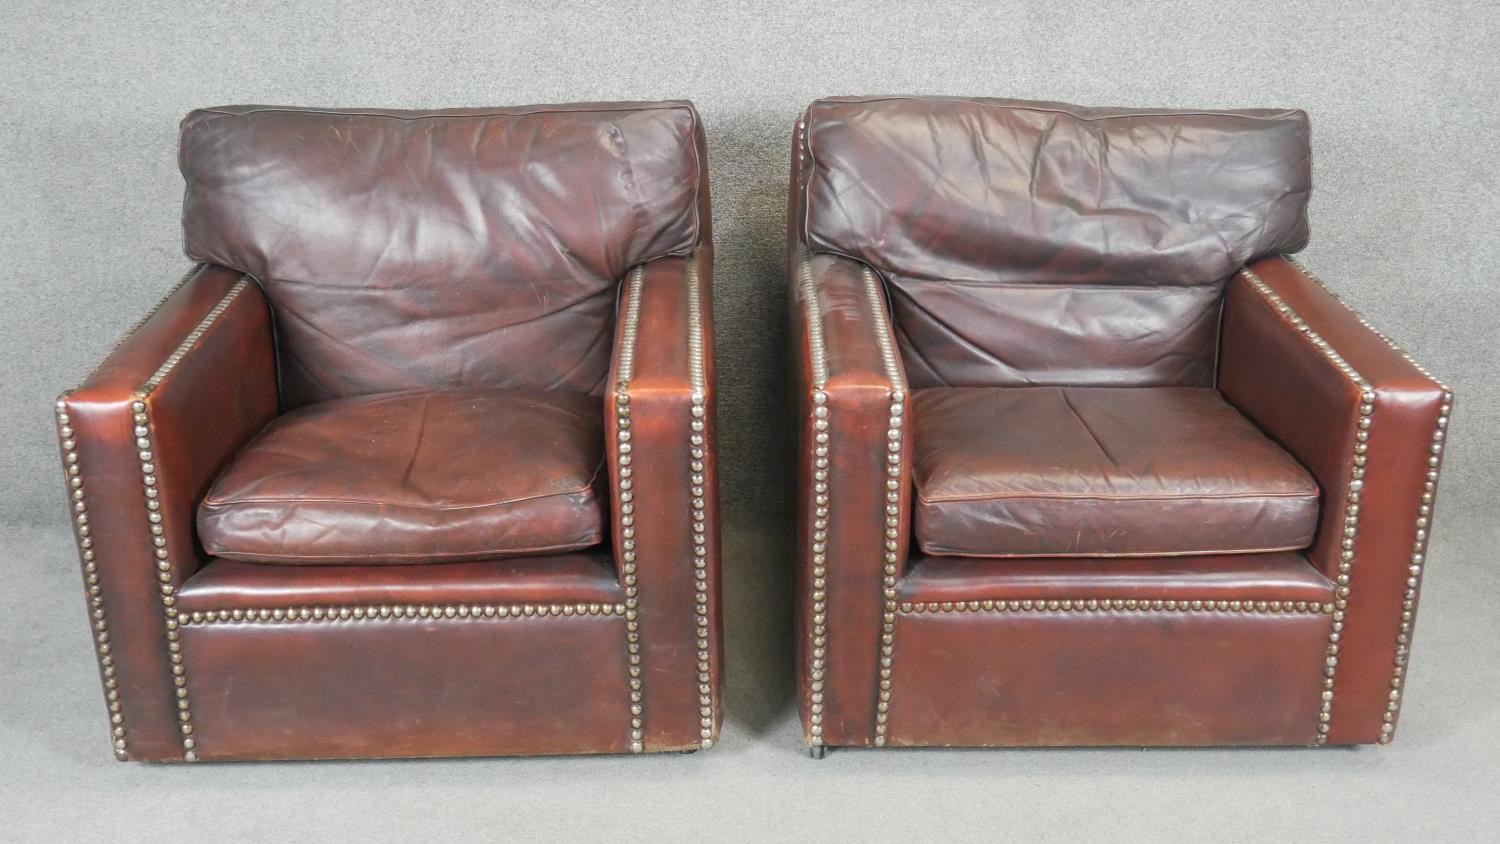 A pair of vintage library armchairs in studded tobacco leather upholstery.